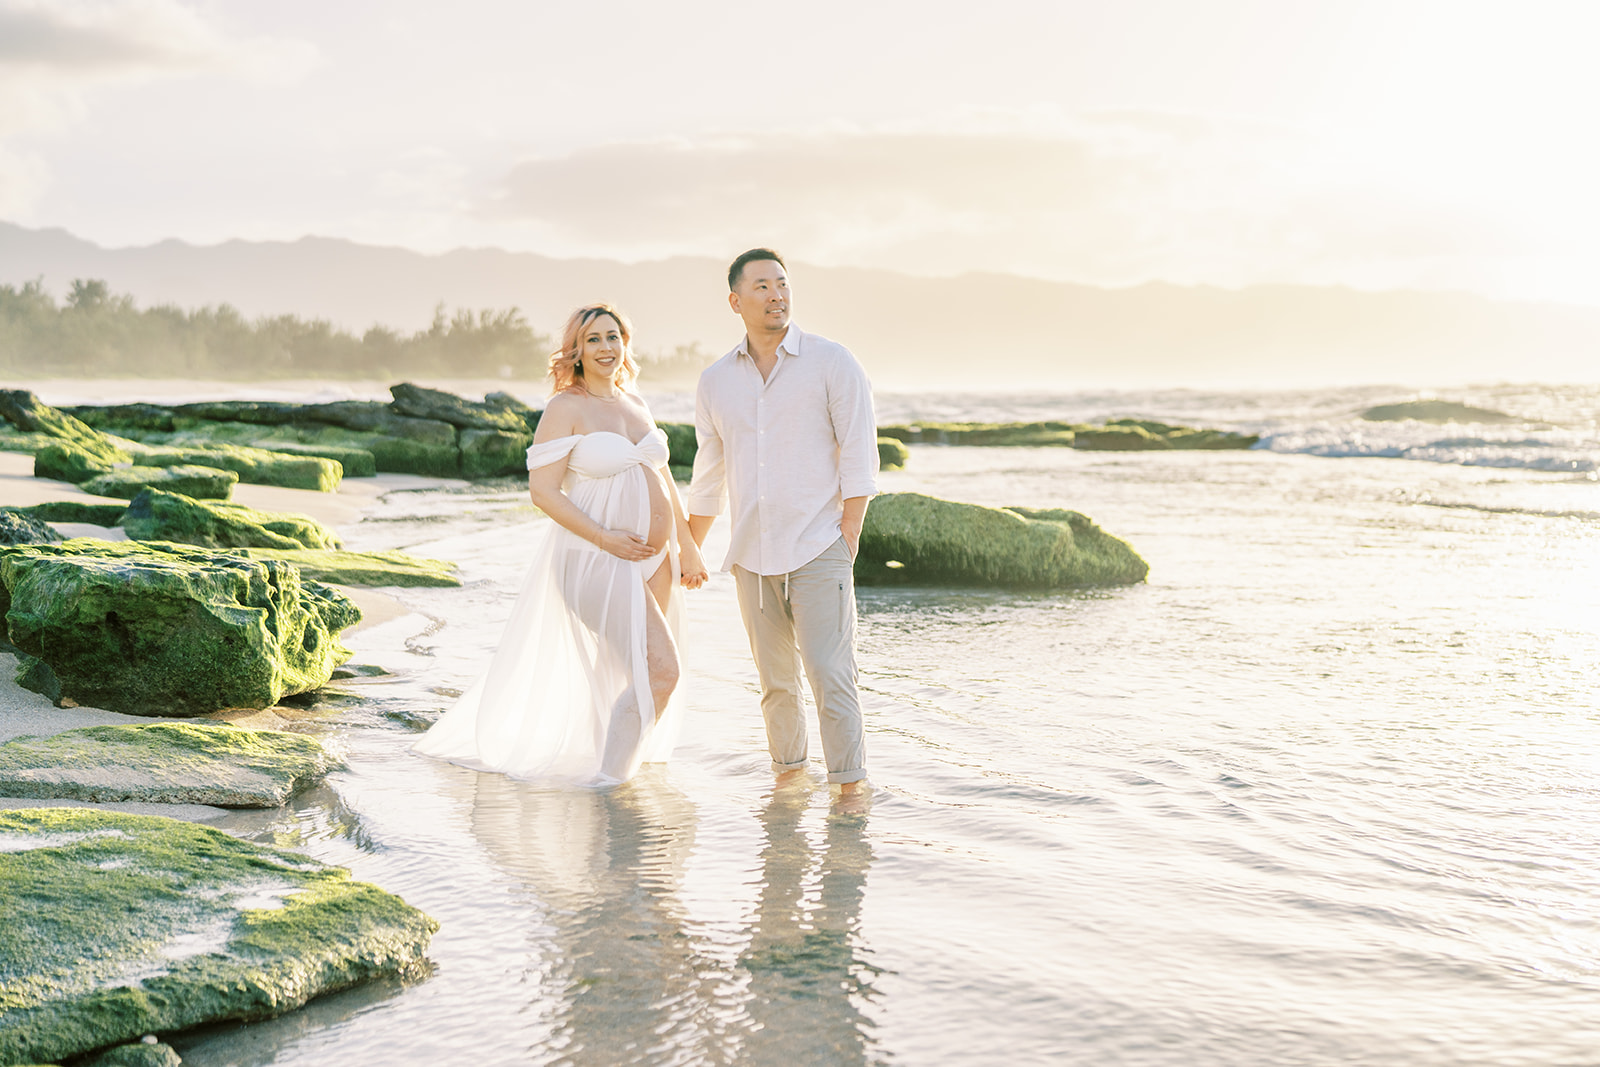 A couple expecting a child holding hands and walking on a beach at sunset on Oahu